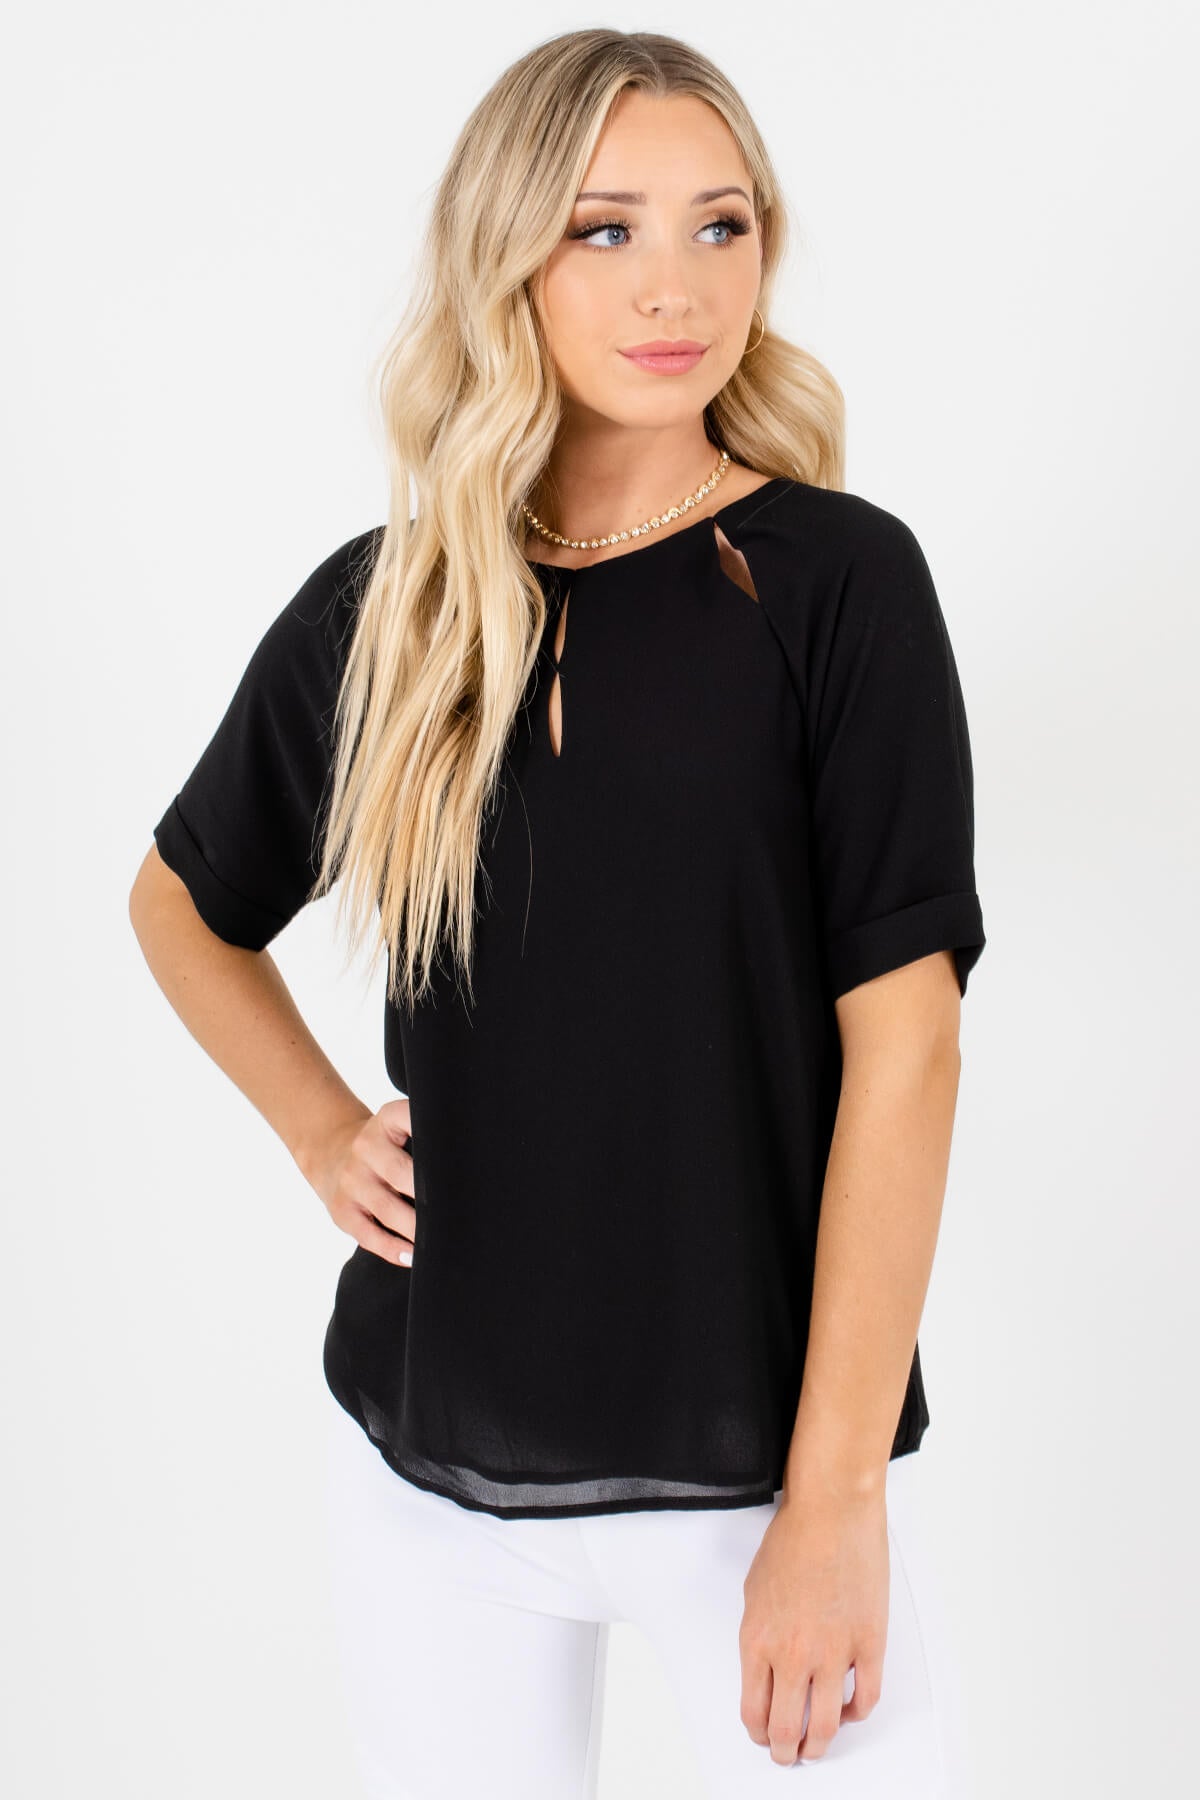 Stealing Hearts Black Blouse